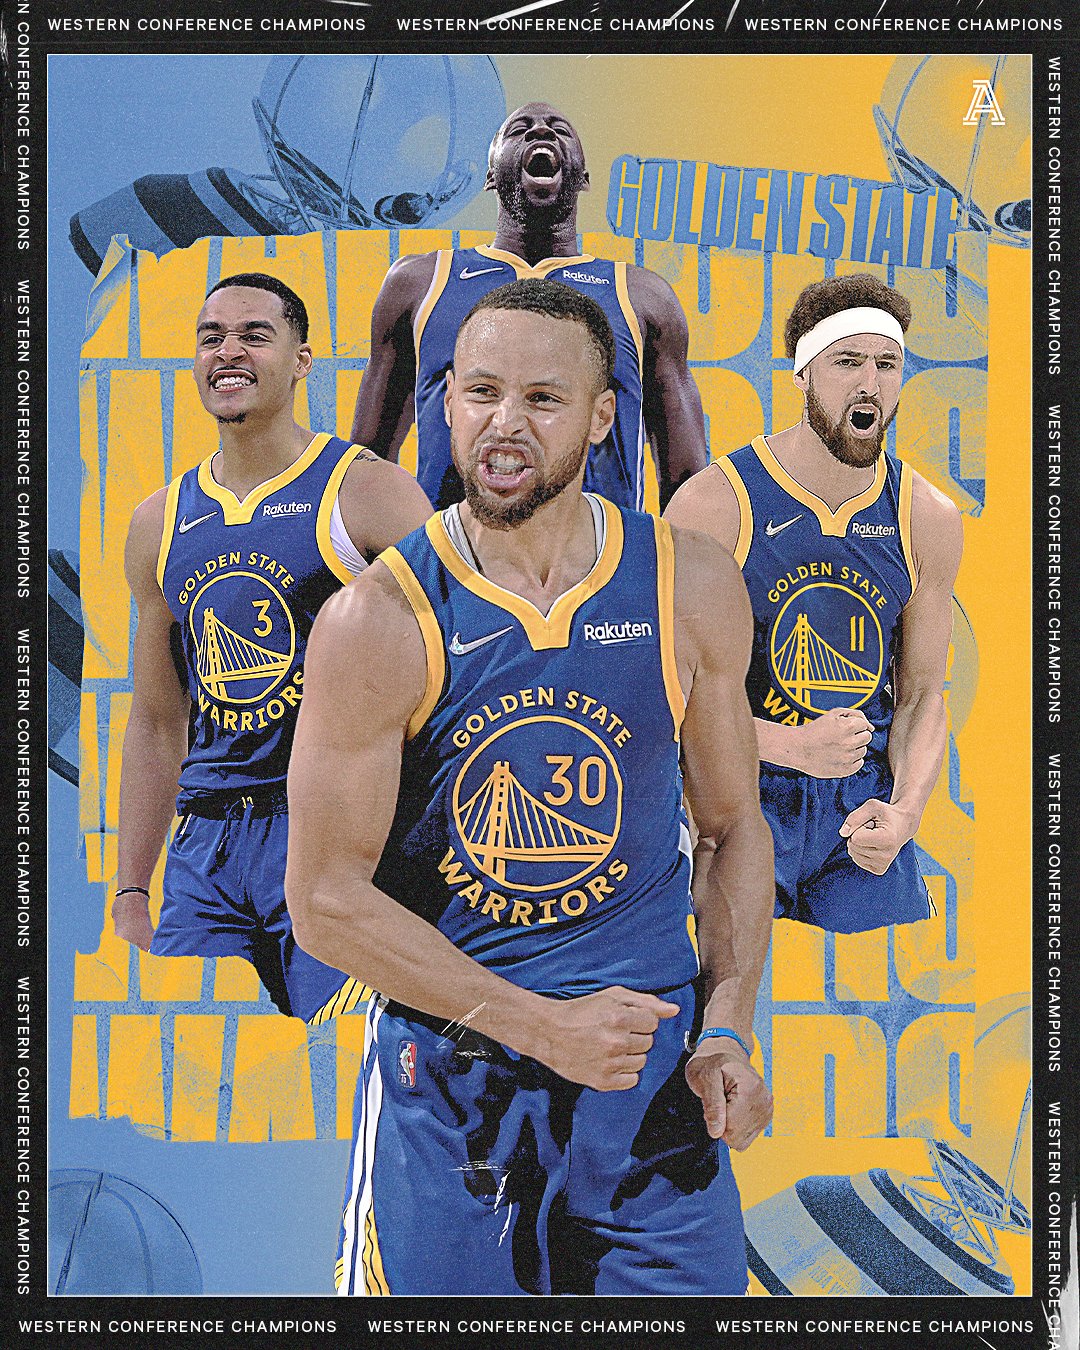 The Golden State Warriors are the 2015 NBA Western Conference